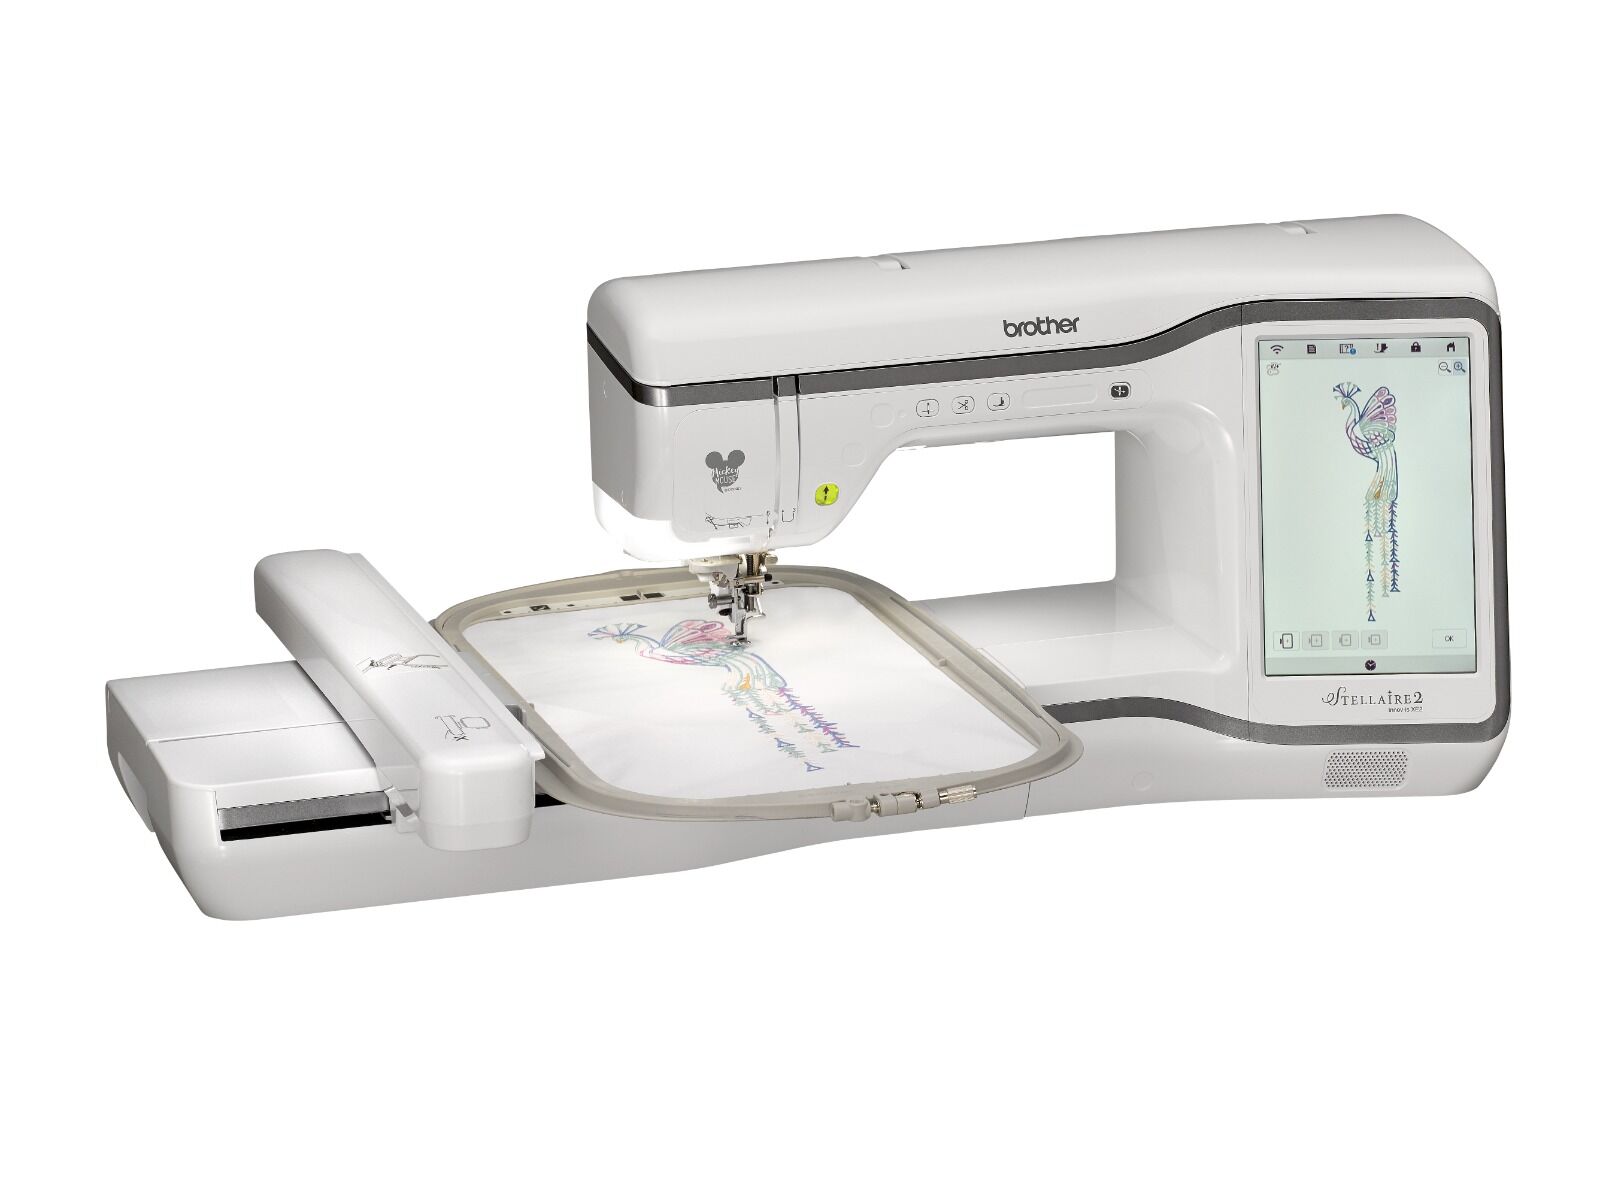 Buy Brand New - Brother Computerized Embroidery Sewing Machine W